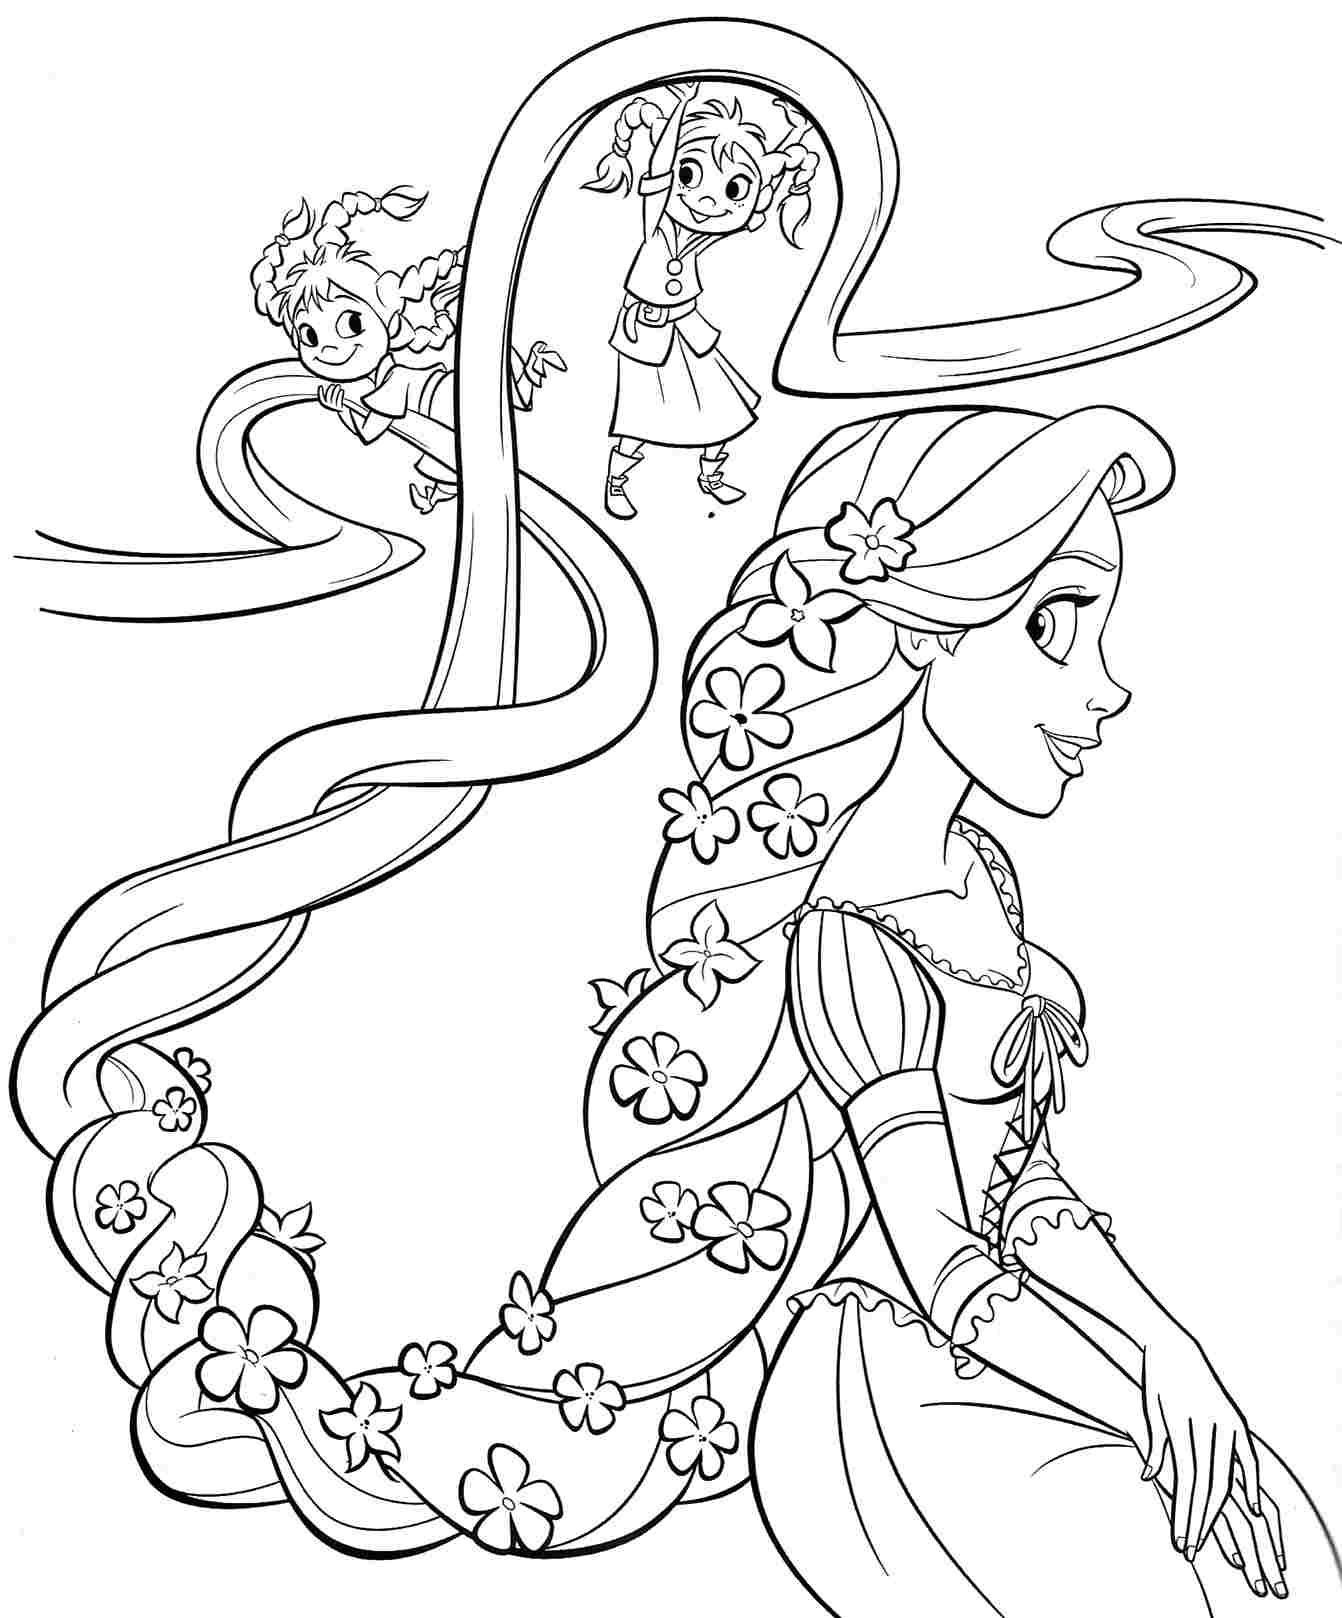 Coloring Pages For Girls Disney Princess
 printable free disney princess rapunzel coloring sheets